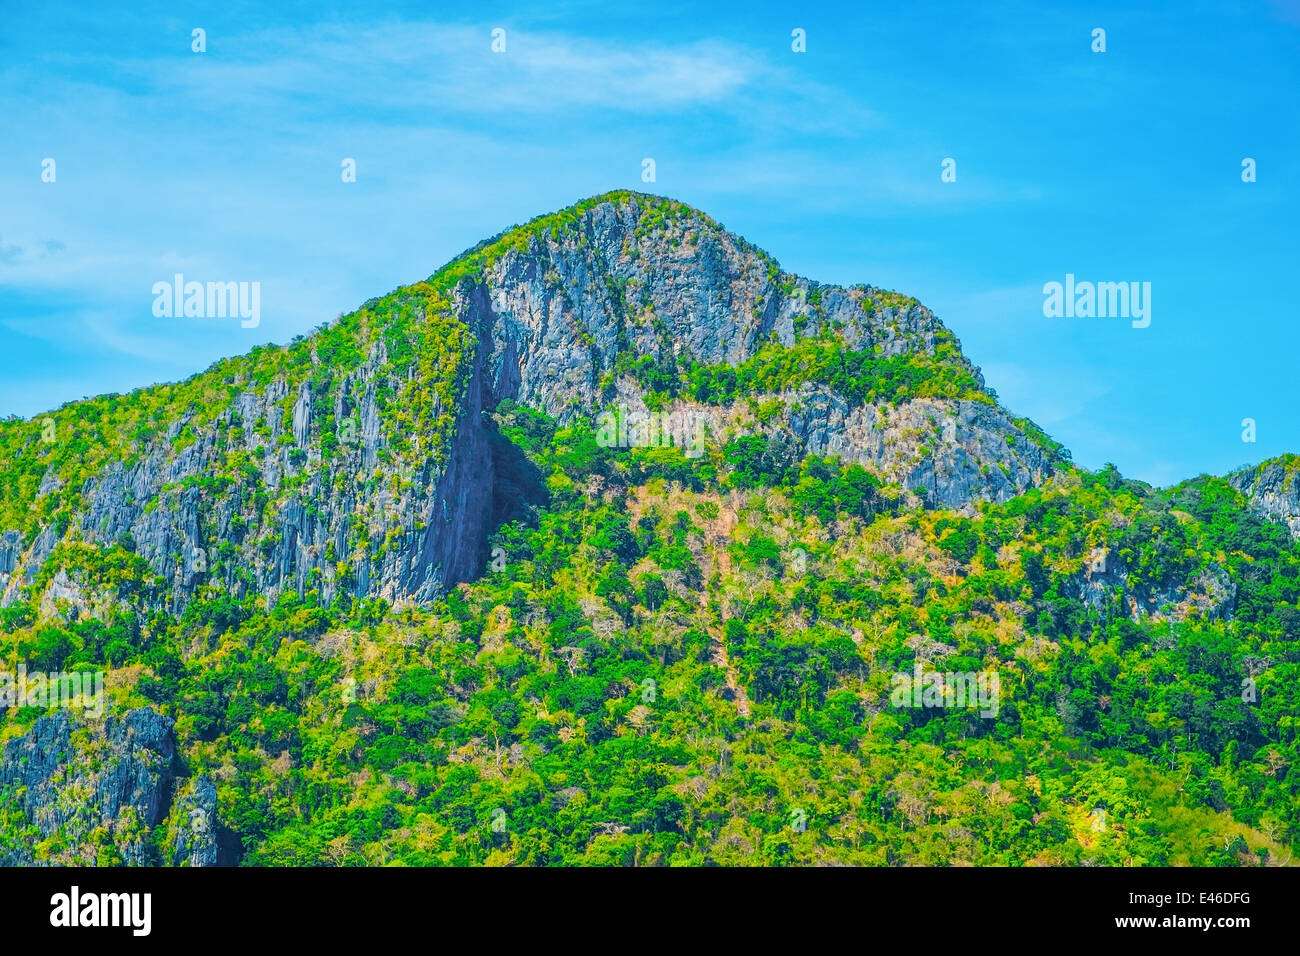 Rocky mountain green forest and blue sky landscape Stock Photo